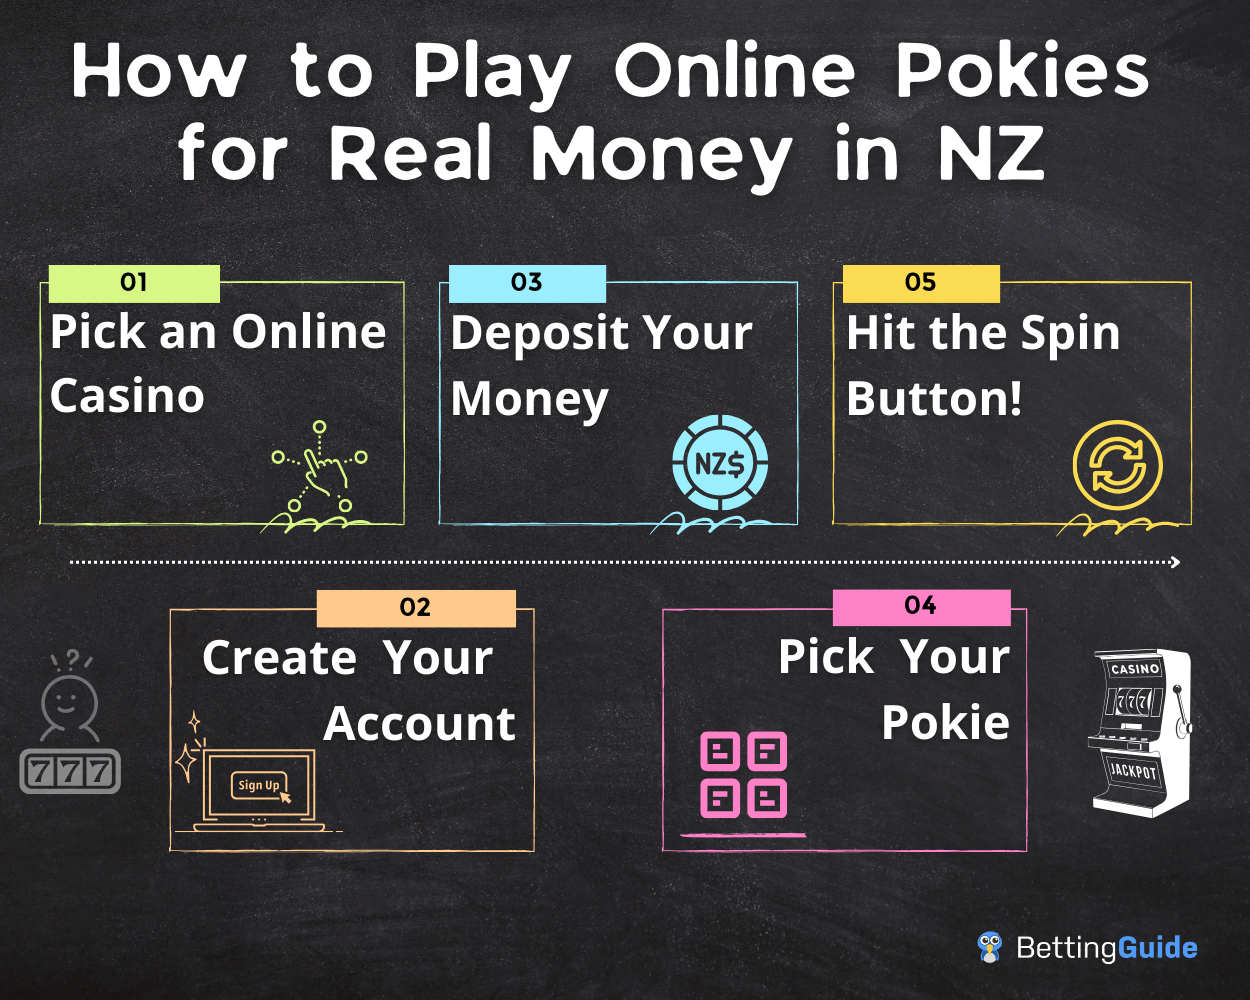 How to Play Online Pokies for Real Money in NZ